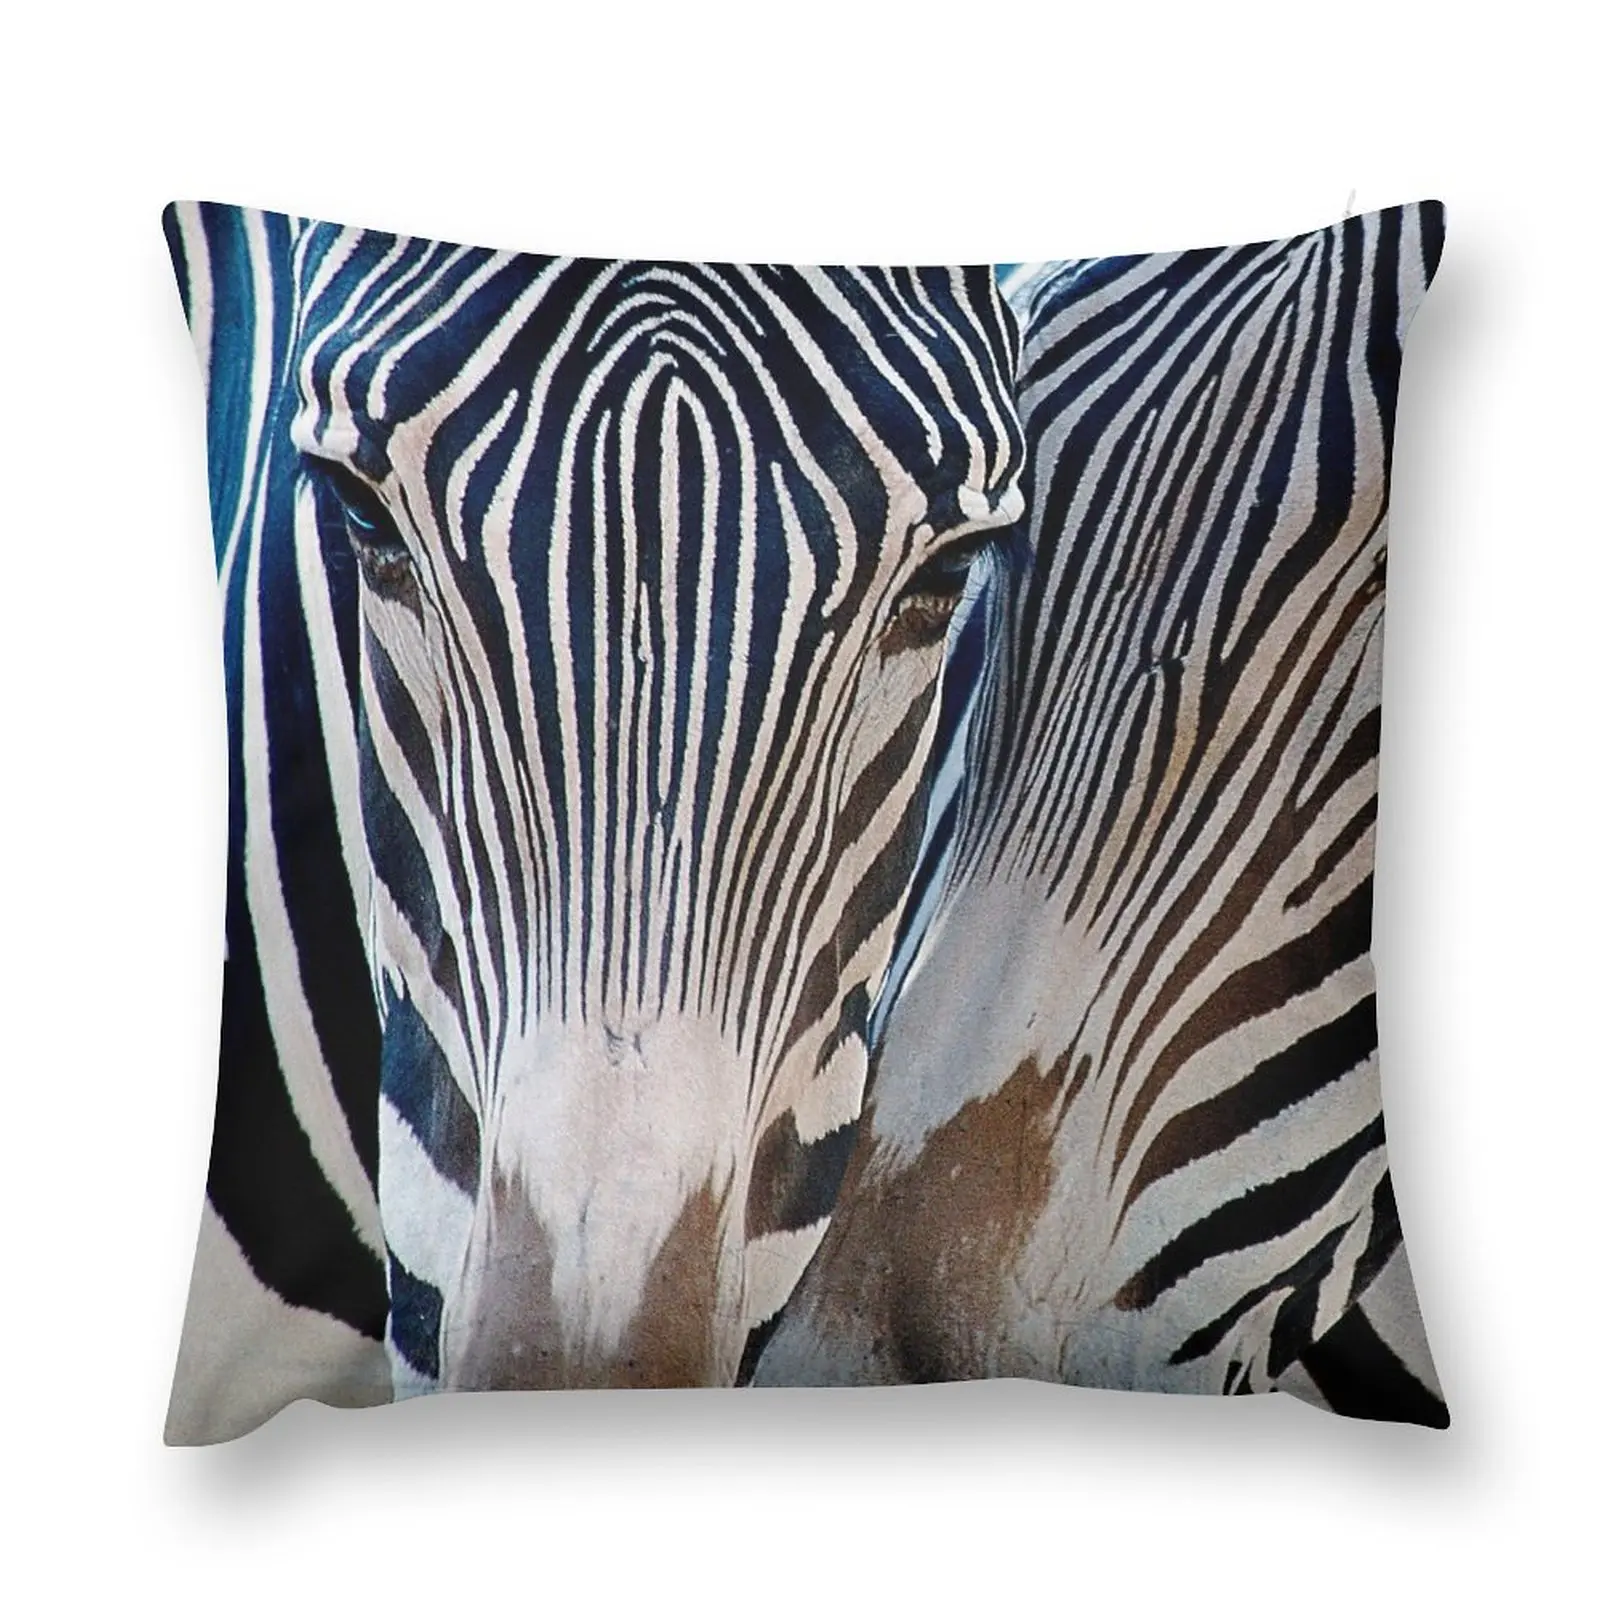 

Zebra Patterns Throw Pillow Decorative Cushion Cover Christmas Pillows luxury home accessories